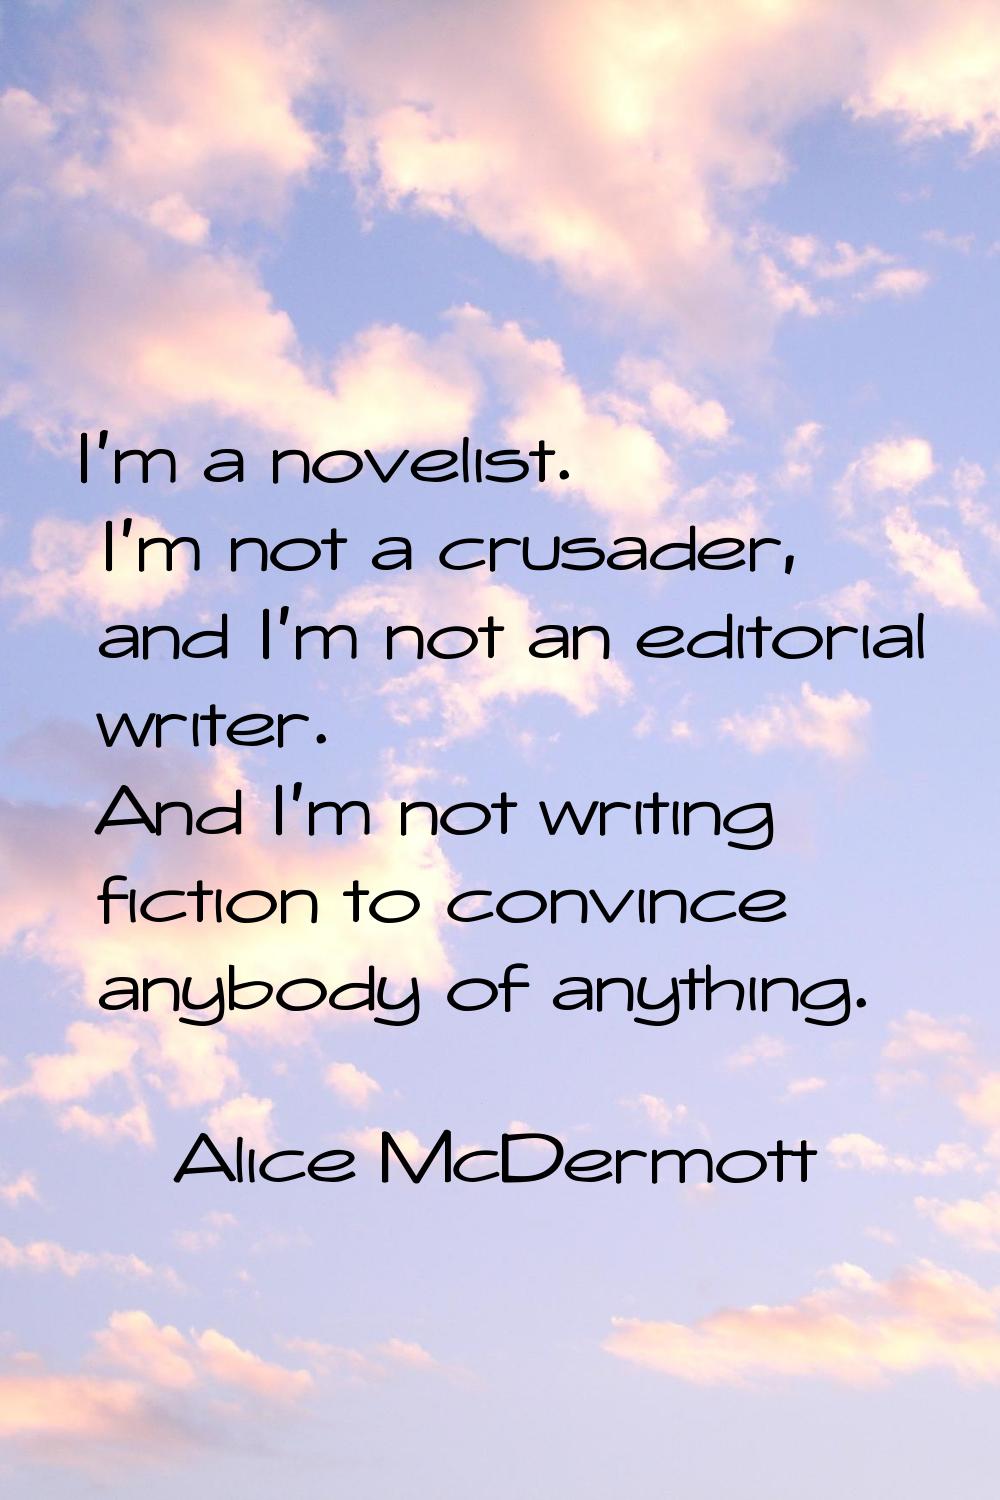 I'm a novelist. I'm not a crusader, and I'm not an editorial writer. And I'm not writing fiction to